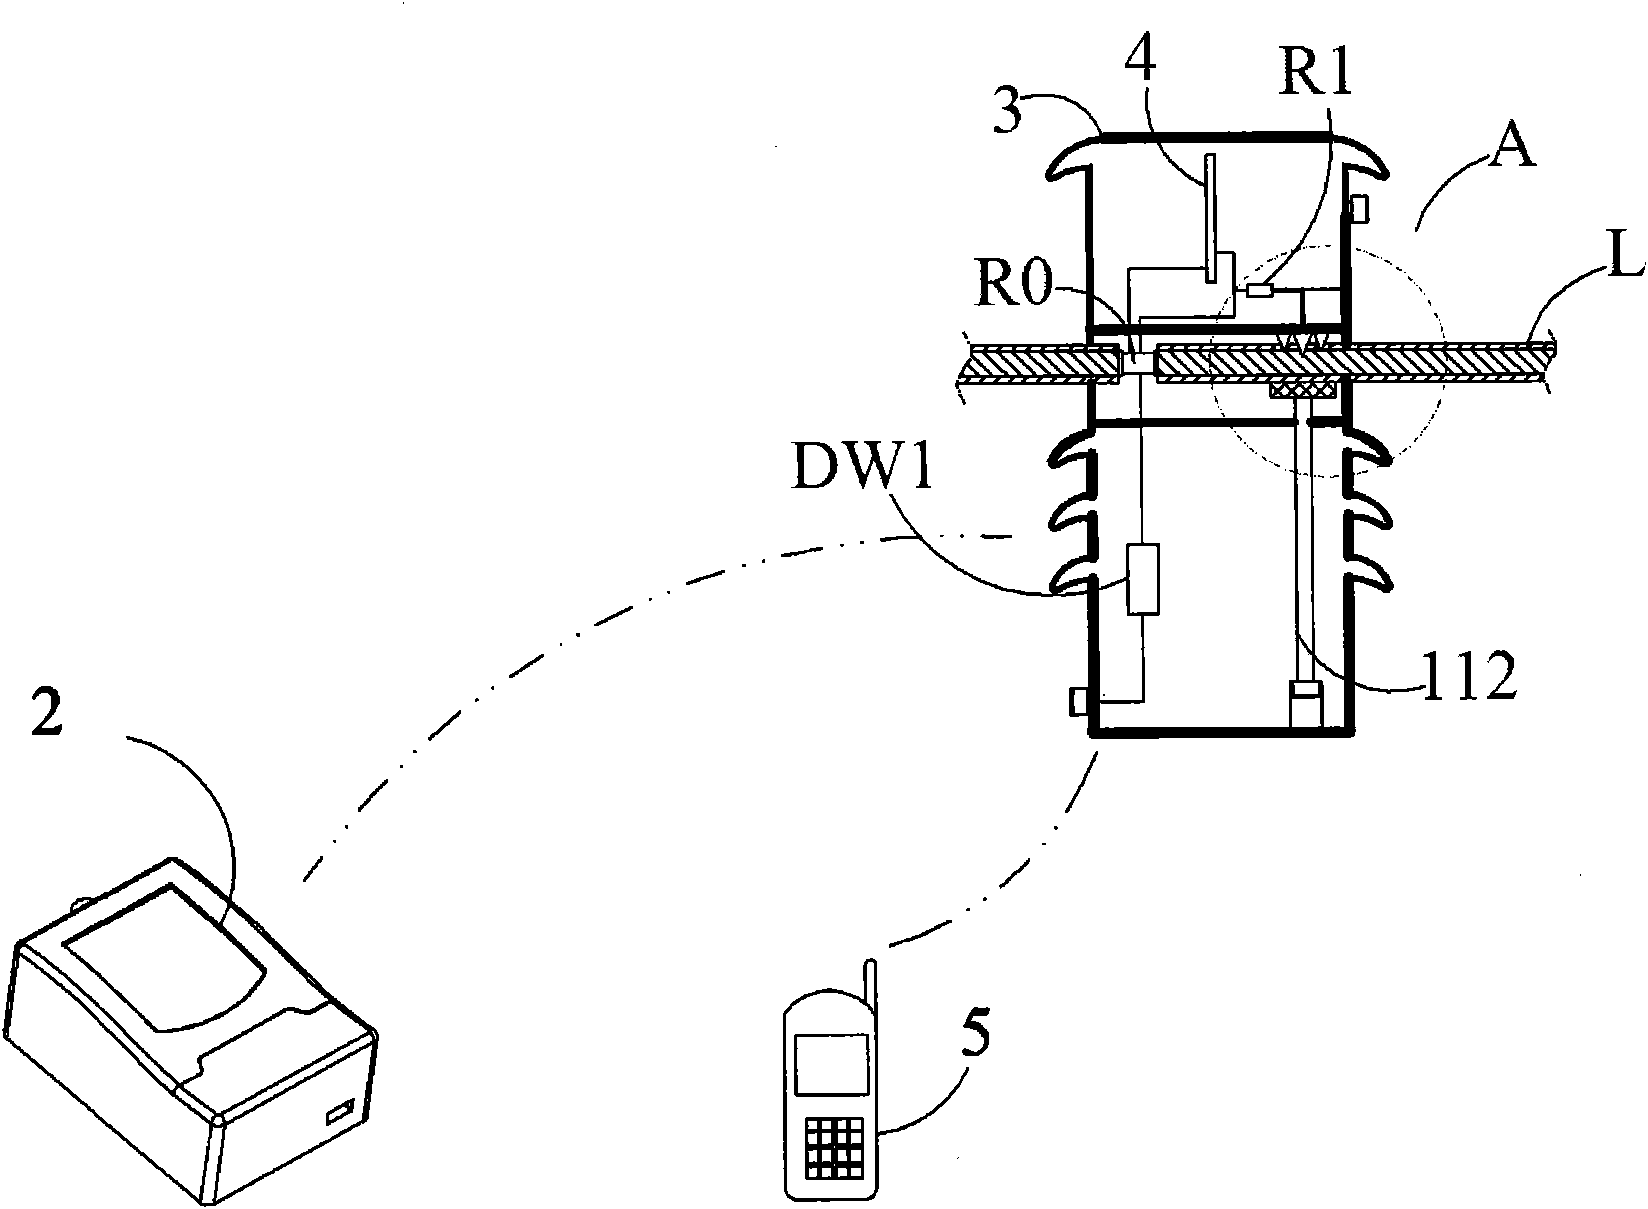 High-voltage direct metering device